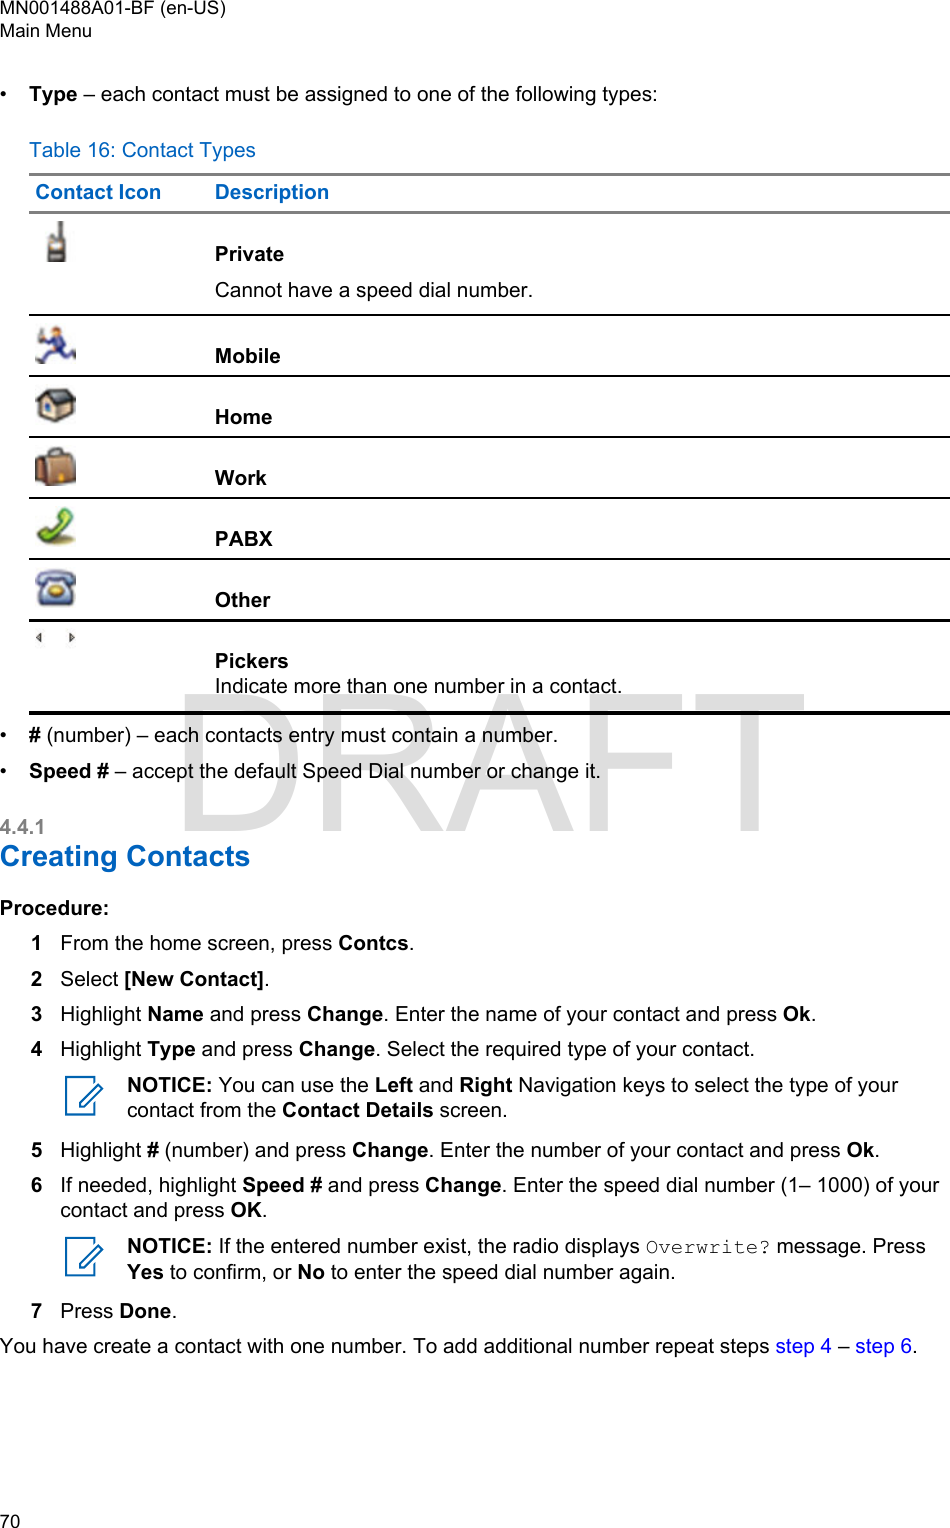 •Type – each contact must be assigned to one of the following types:Table 16: Contact TypesContact Icon DescriptionPrivateCannot have a speed dial number.MobileHomeWorkPABXOtherPickersIndicate more than one number in a contact.•# (number) – each contacts entry must contain a number.•Speed # – accept the default Speed Dial number or change it.4.4.1Creating ContactsProcedure:1From the home screen, press Contcs.2Select [New Contact].3Highlight Name and press Change. Enter the name of your contact and press Ok.4Highlight Type and press Change. Select the required type of your contact.NOTICE: You can use the Left and Right Navigation keys to select the type of yourcontact from the Contact Details screen.5Highlight # (number) and press Change. Enter the number of your contact and press Ok.6If needed, highlight Speed # and press Change. Enter the speed dial number (1– 1000) of yourcontact and press OK.NOTICE: If the entered number exist, the radio displays Overwrite? message. PressYes to confirm, or No to enter the speed dial number again.7Press Done.You have create a contact with one number. To add additional number repeat steps step 4 – step 6.MN001488A01-BF (en-US)Main Menu70  DRAFT